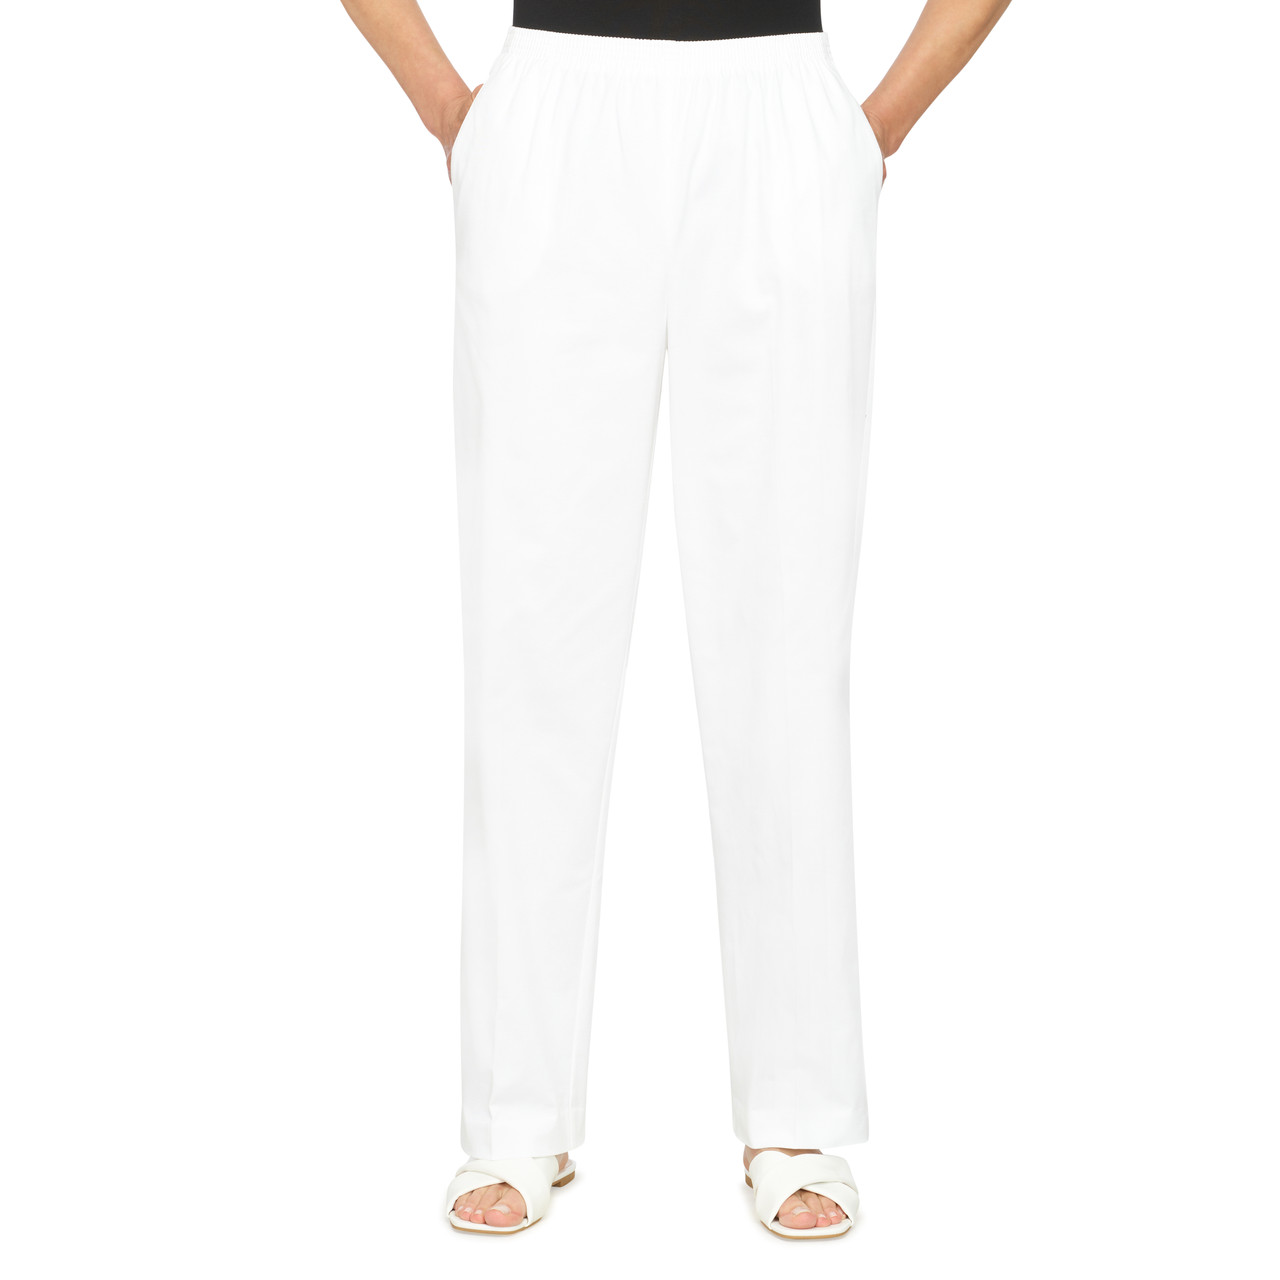 Alfred Dunner Women's Classic Textured Proportioned Short Pant